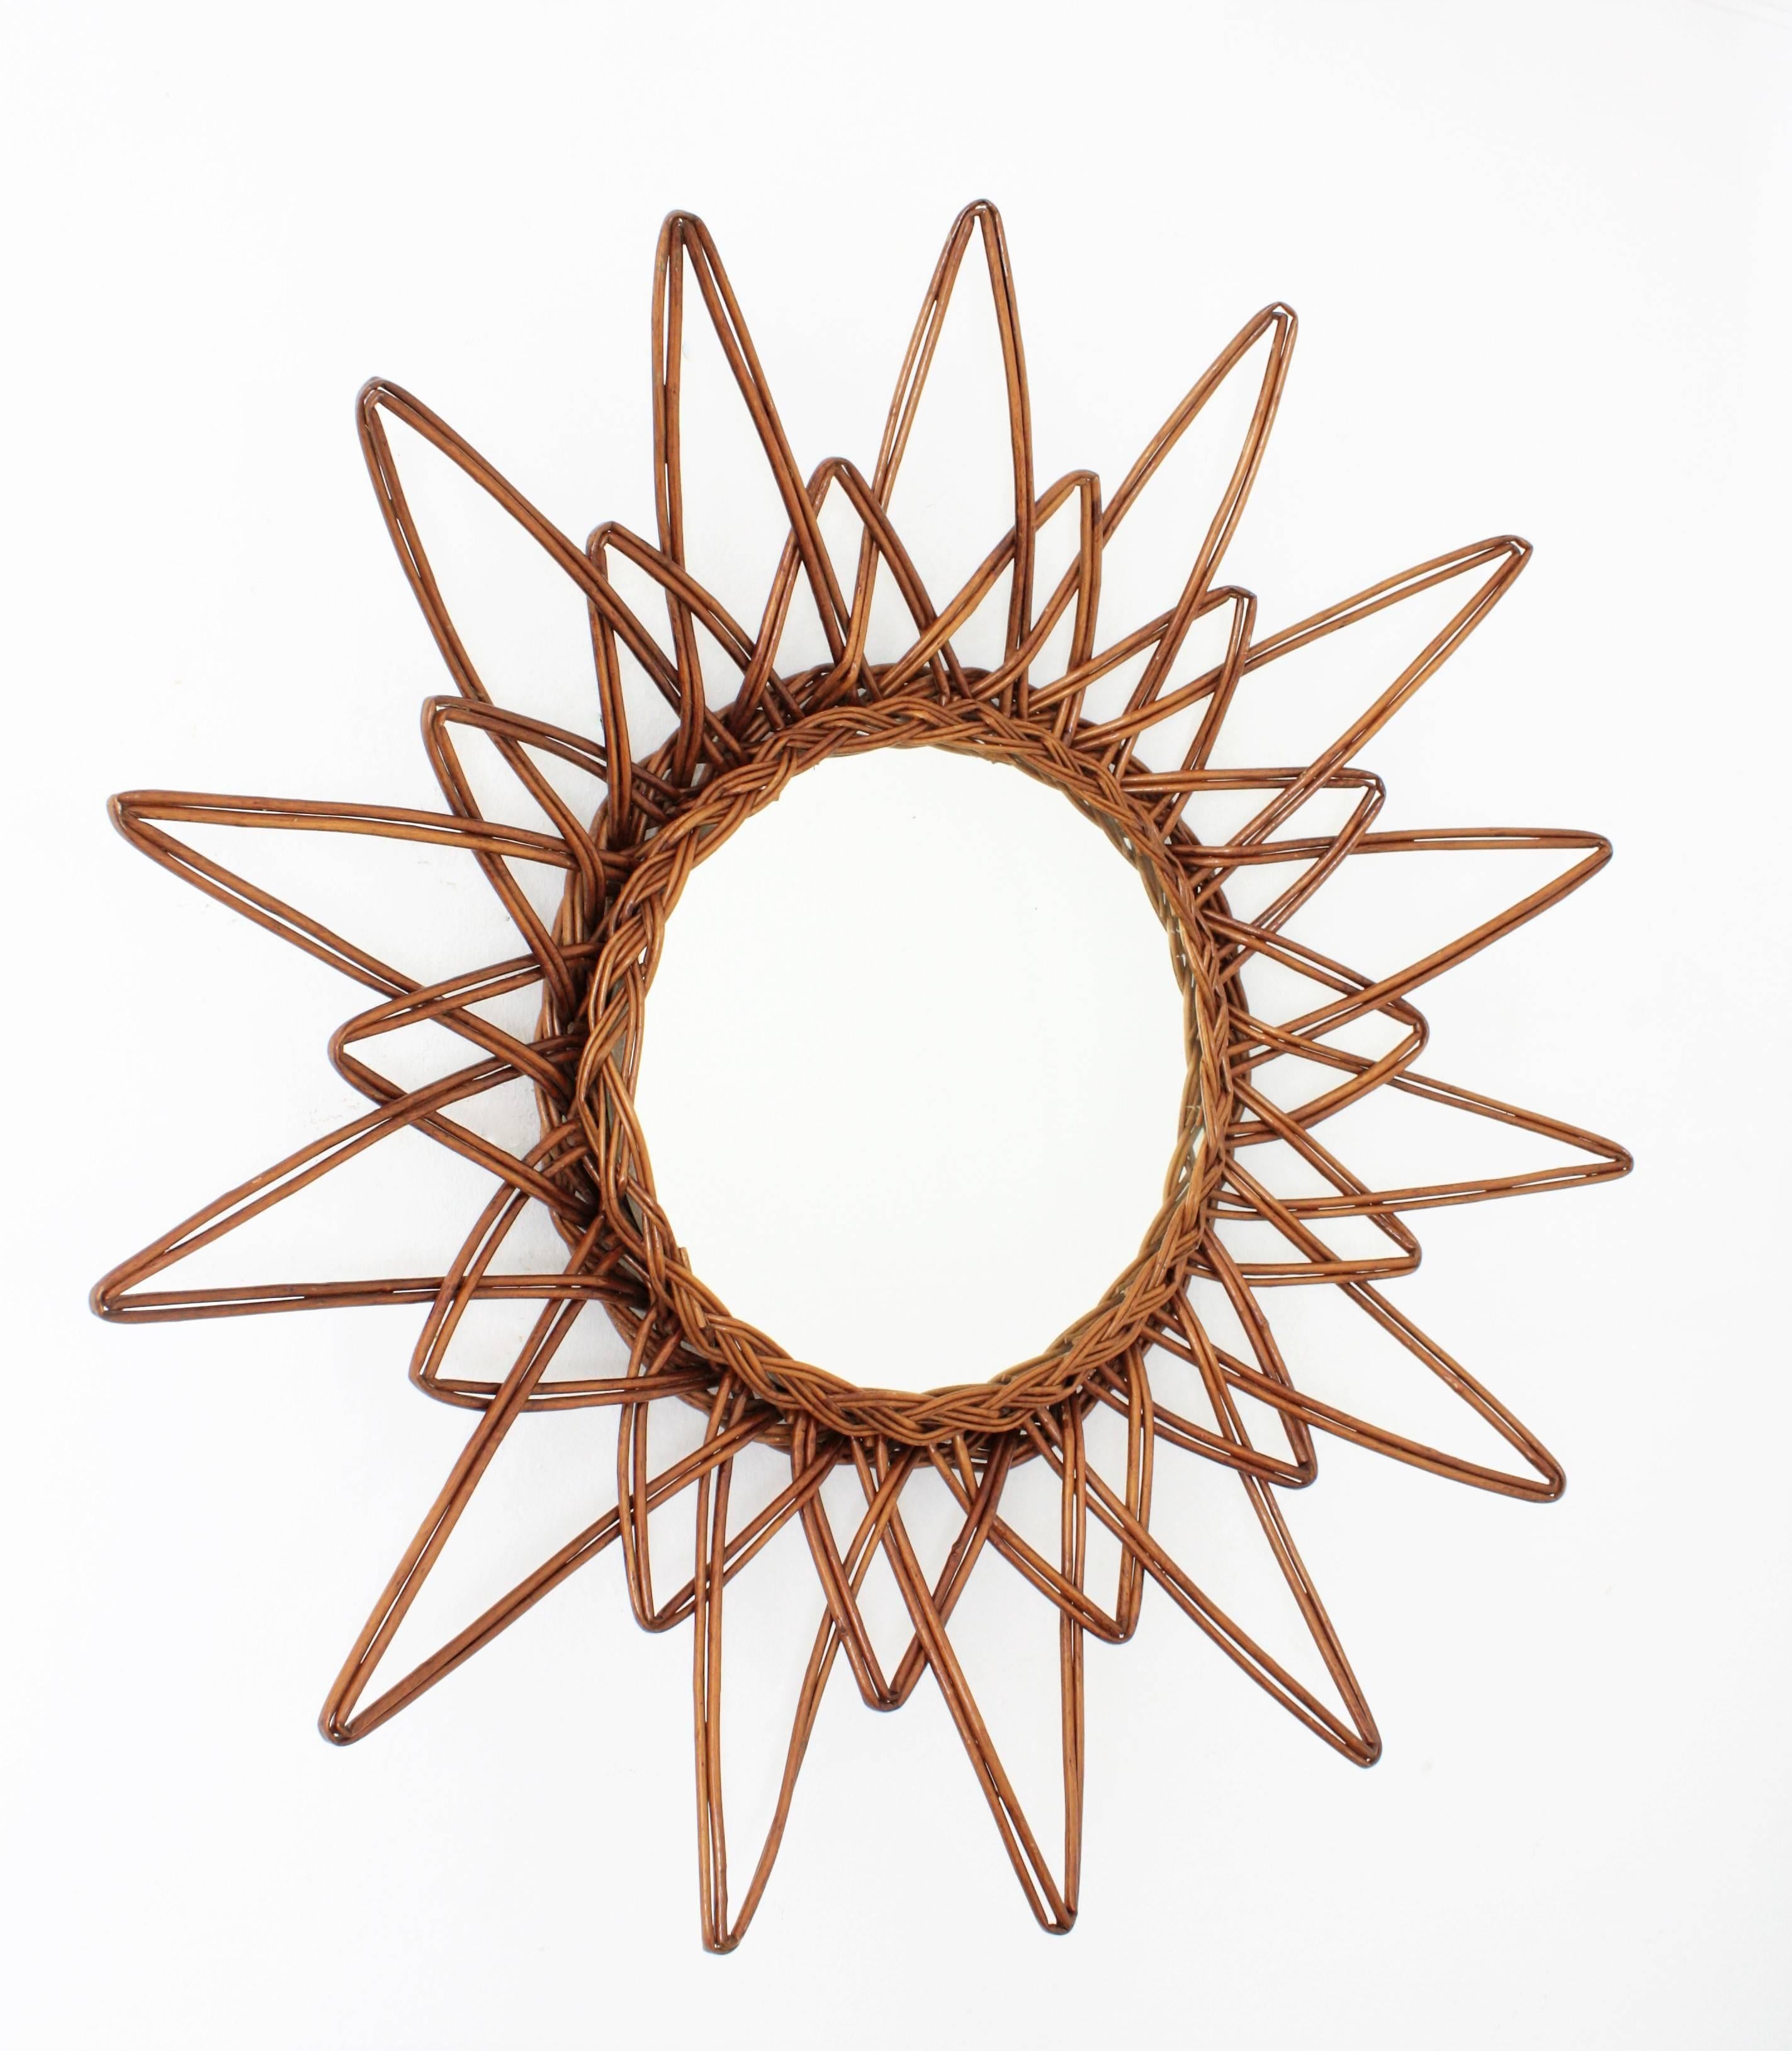 A beautiful handcrafted rattan or wicker starburst mirror. A highly decorative piece with short and long beams, star shape and beautiful color.
Spain, 1960s.

Also lovely to place with other mirrors in this manner creating a wall decoration.